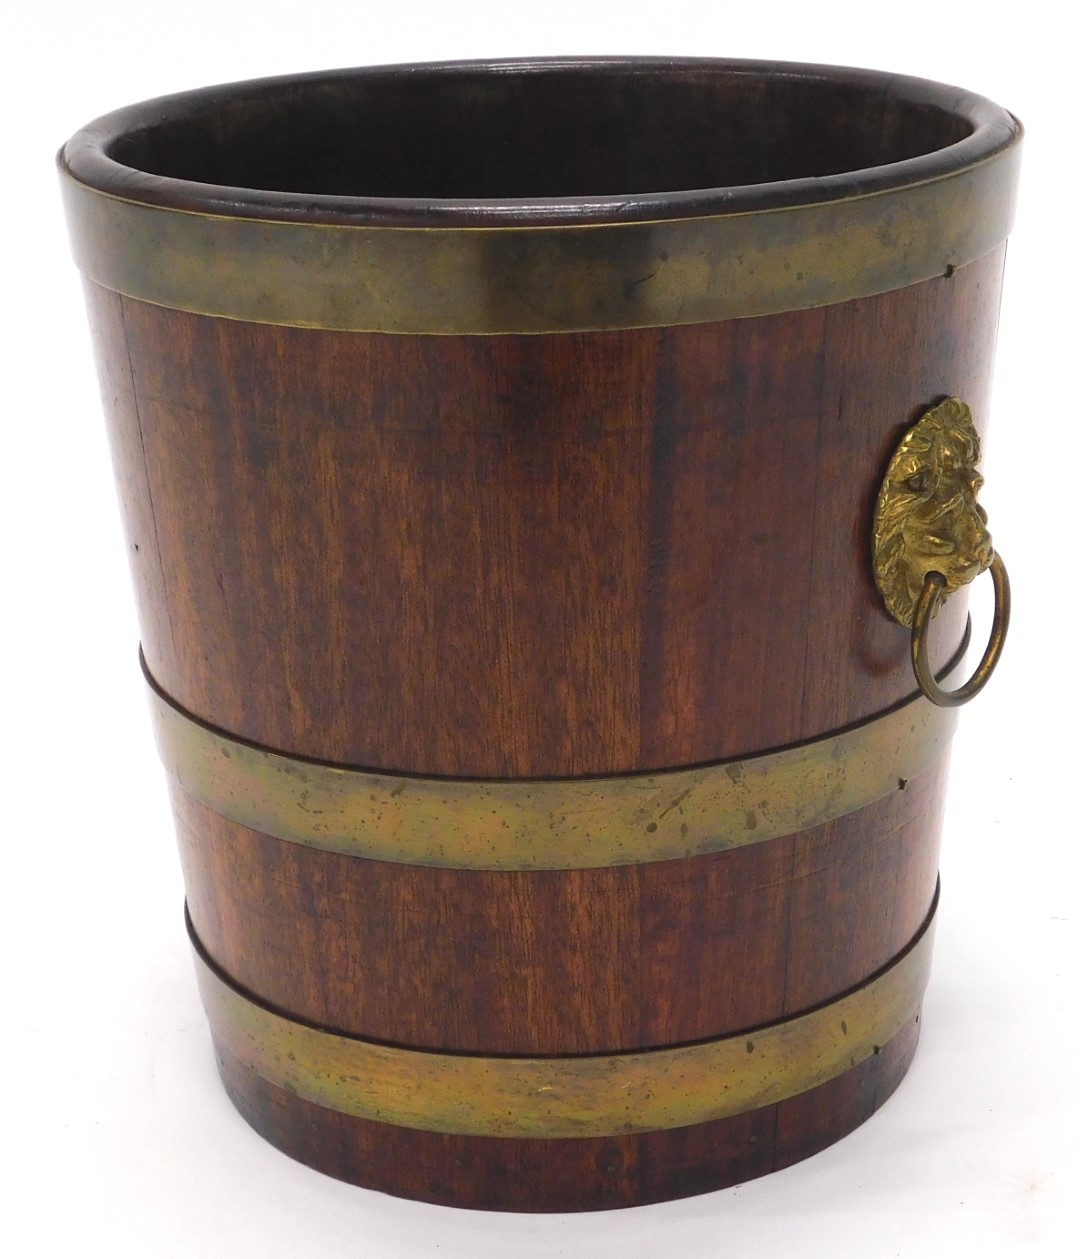 A 19thC mahogany and brass coopered waste paper basket or jardiniere, with gilt metal lion mask